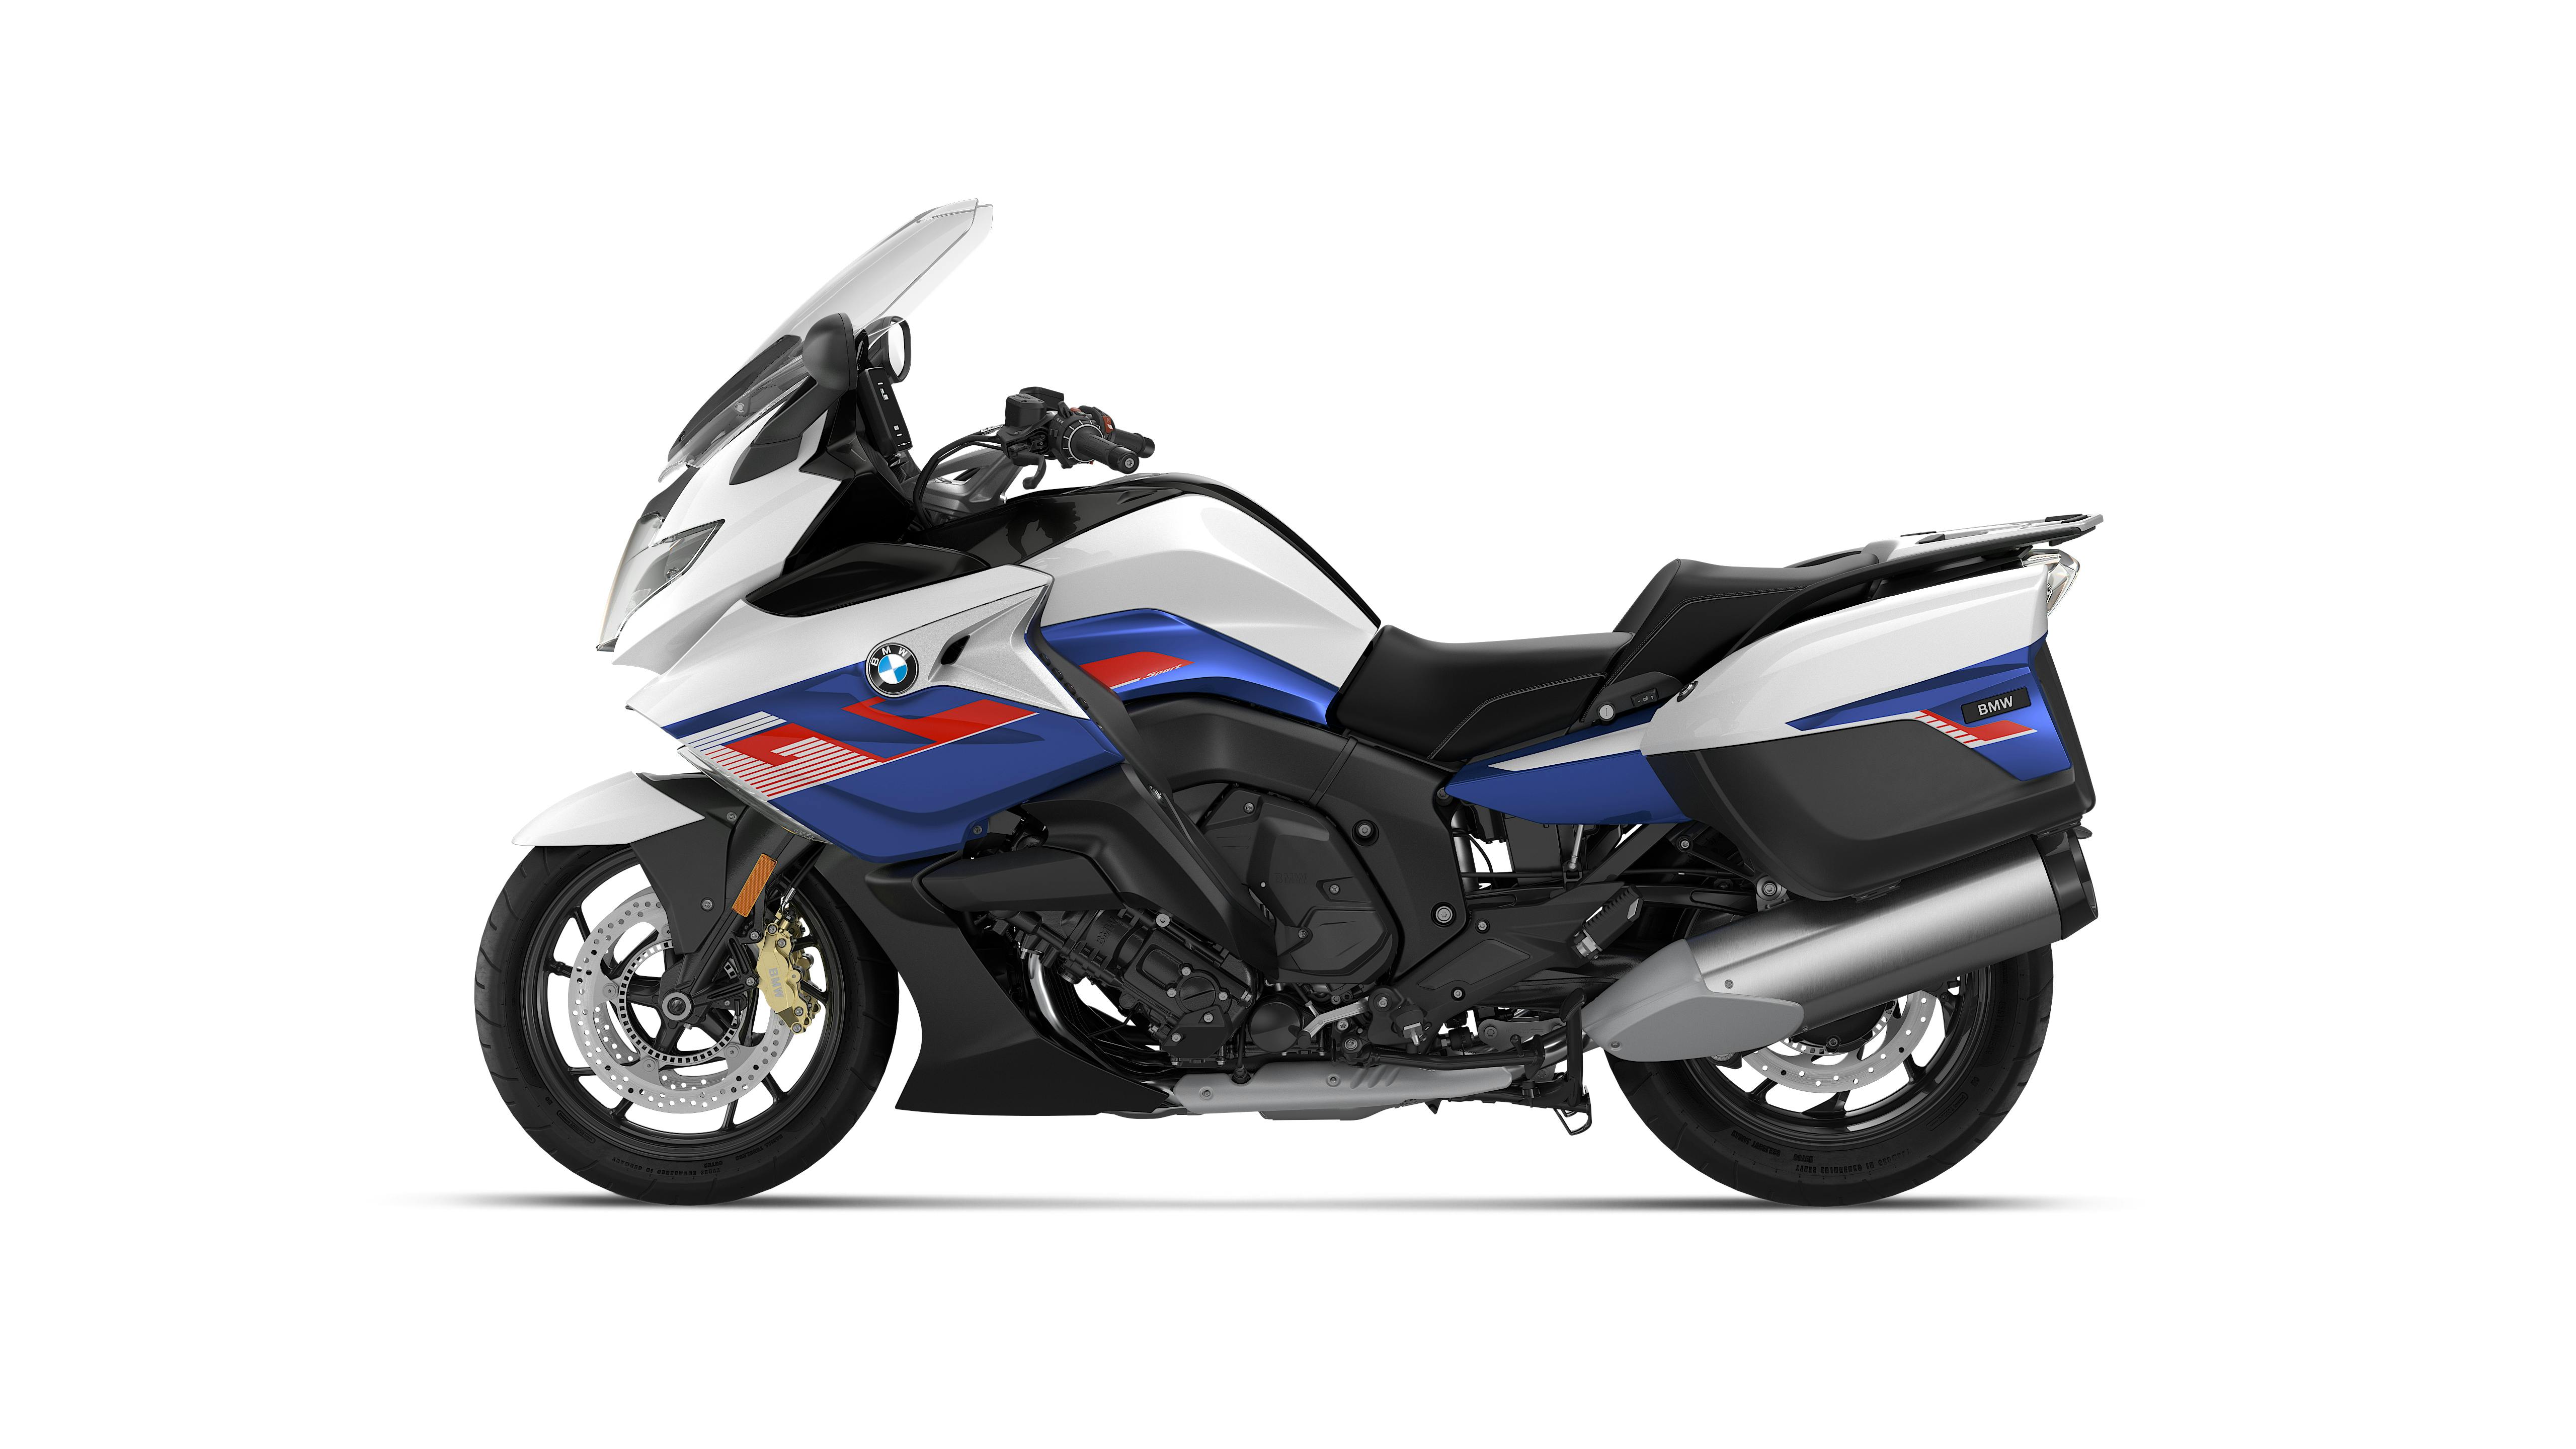 BMW K 1600 GT SPORT in Light White / Racing Blue Metallic / Racing Red colour